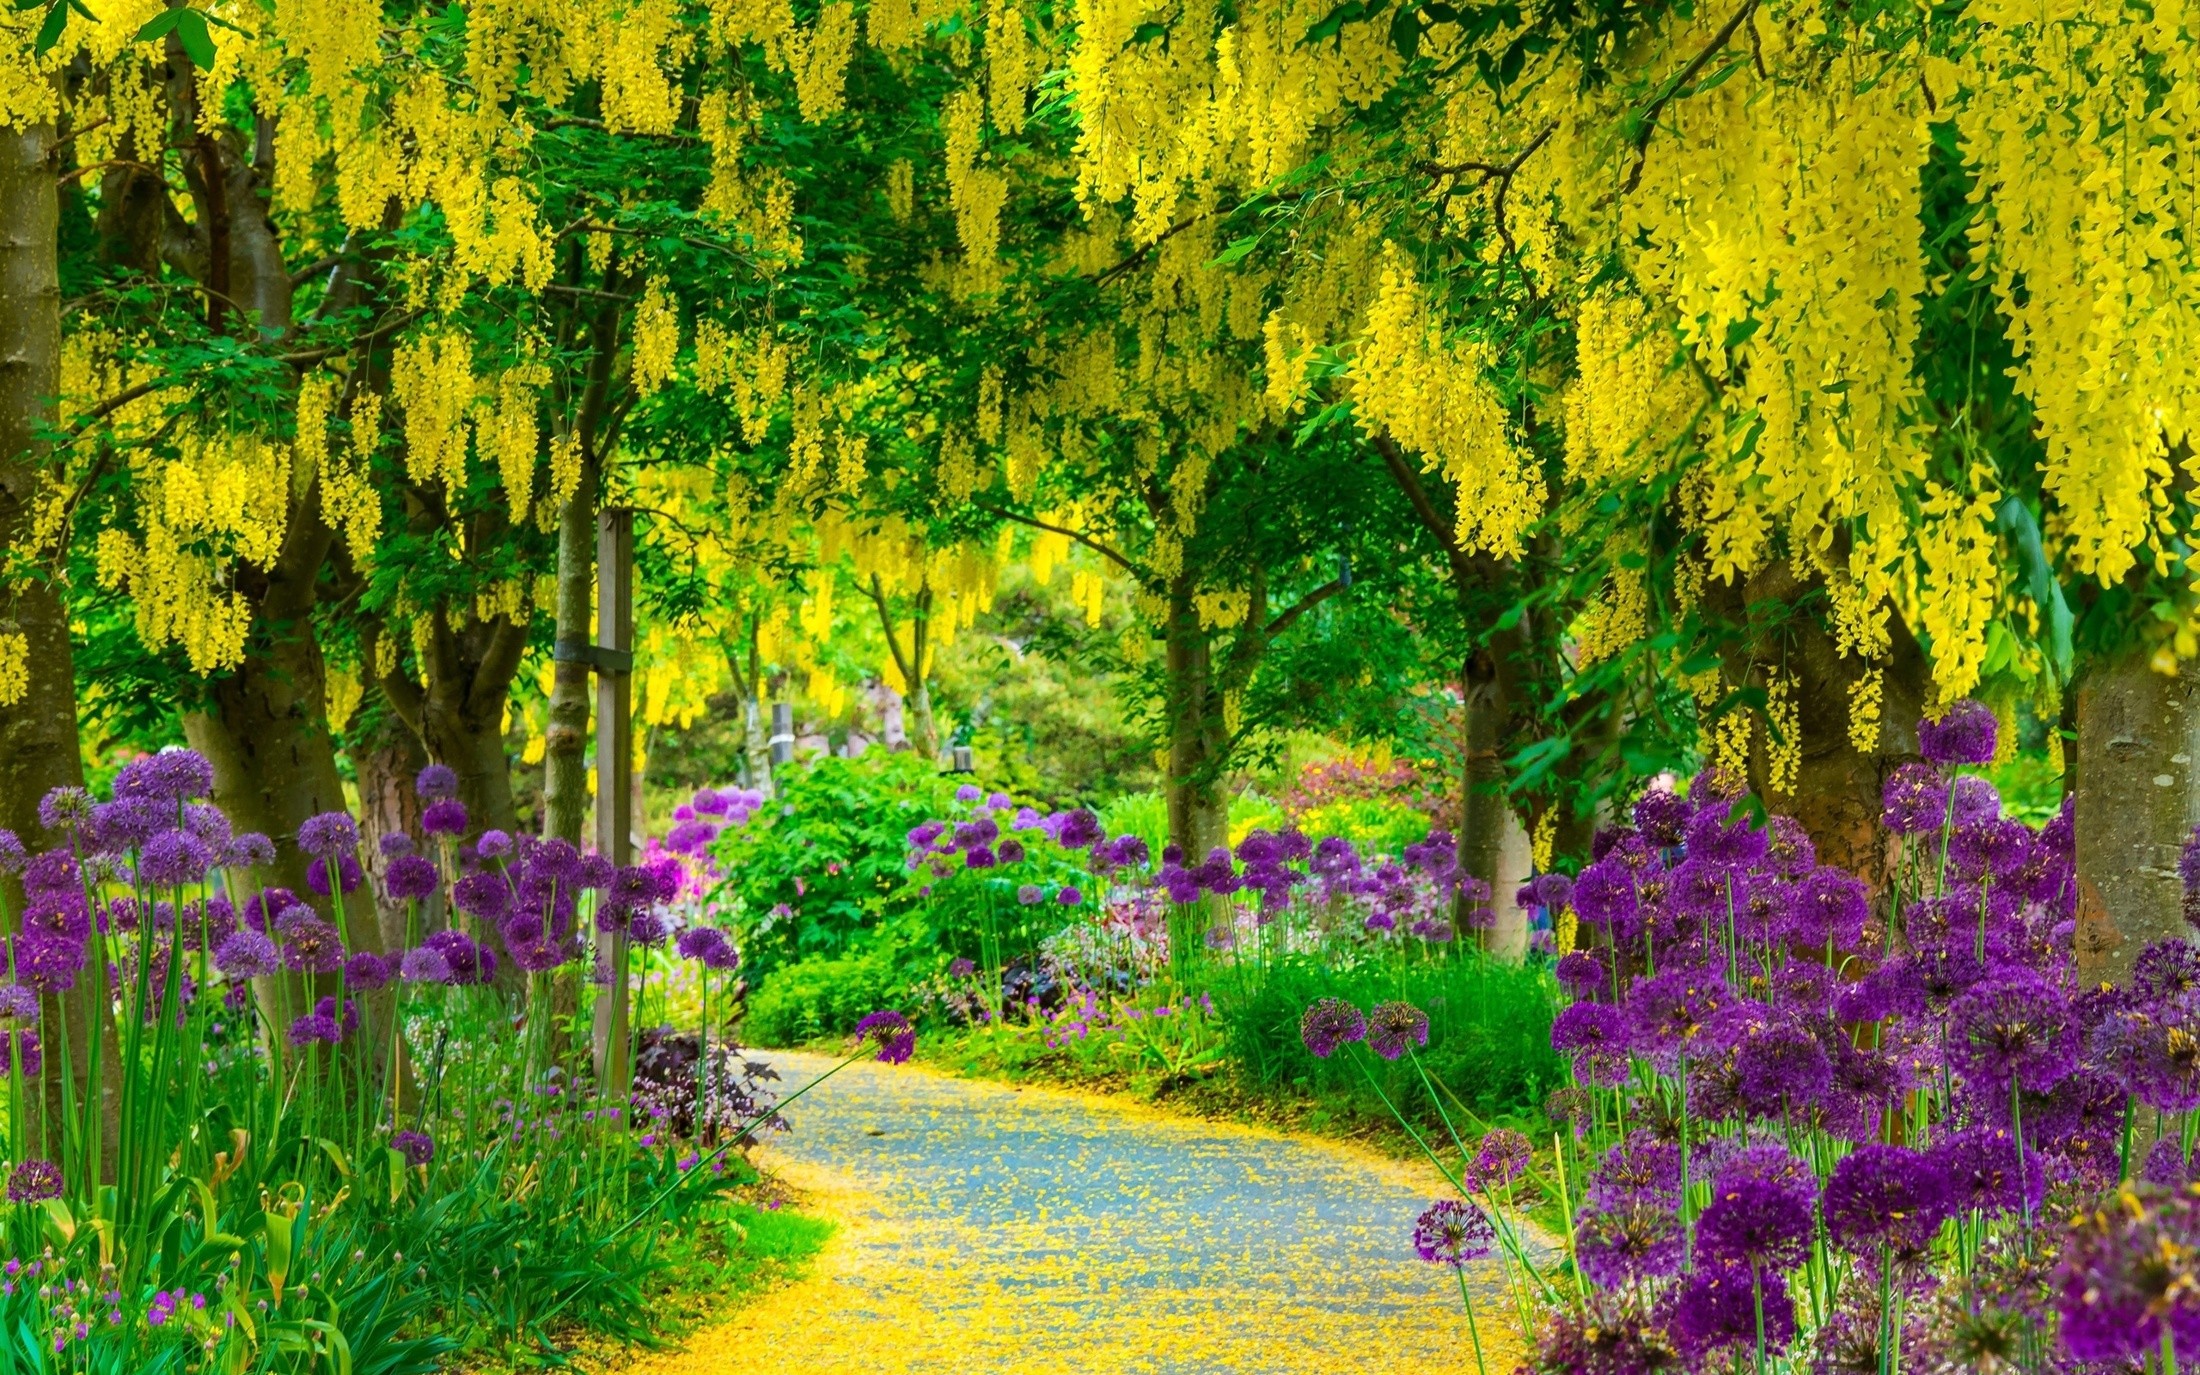 General 2200x1375 flowers blossoms garden outdoors plants path trees leaves